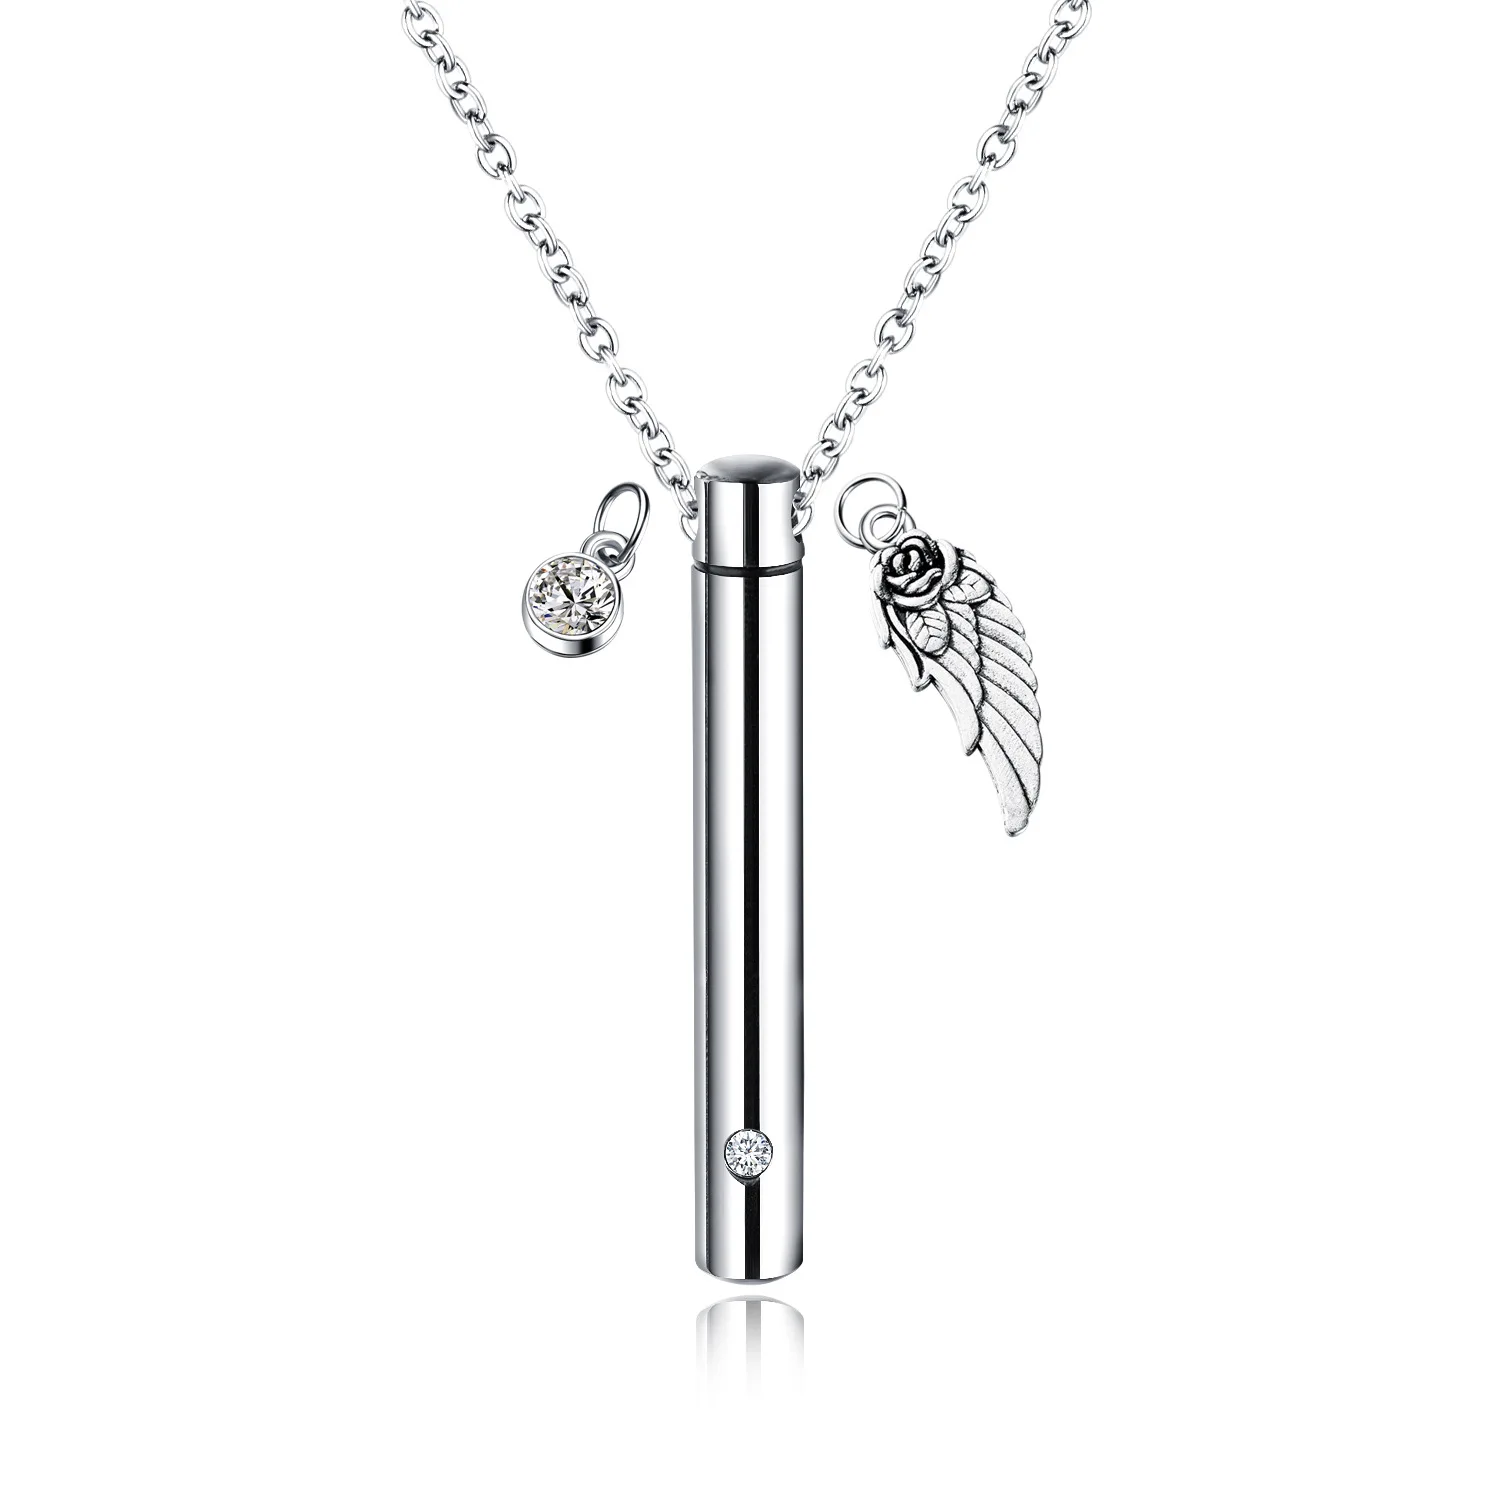 

2020 Crystal Beautiful Cremation Urn Necklace For Ash Jewelry Vendor Stainless Steel Mantra Wing Necklace Ash Pendant Jewelry, White gold black